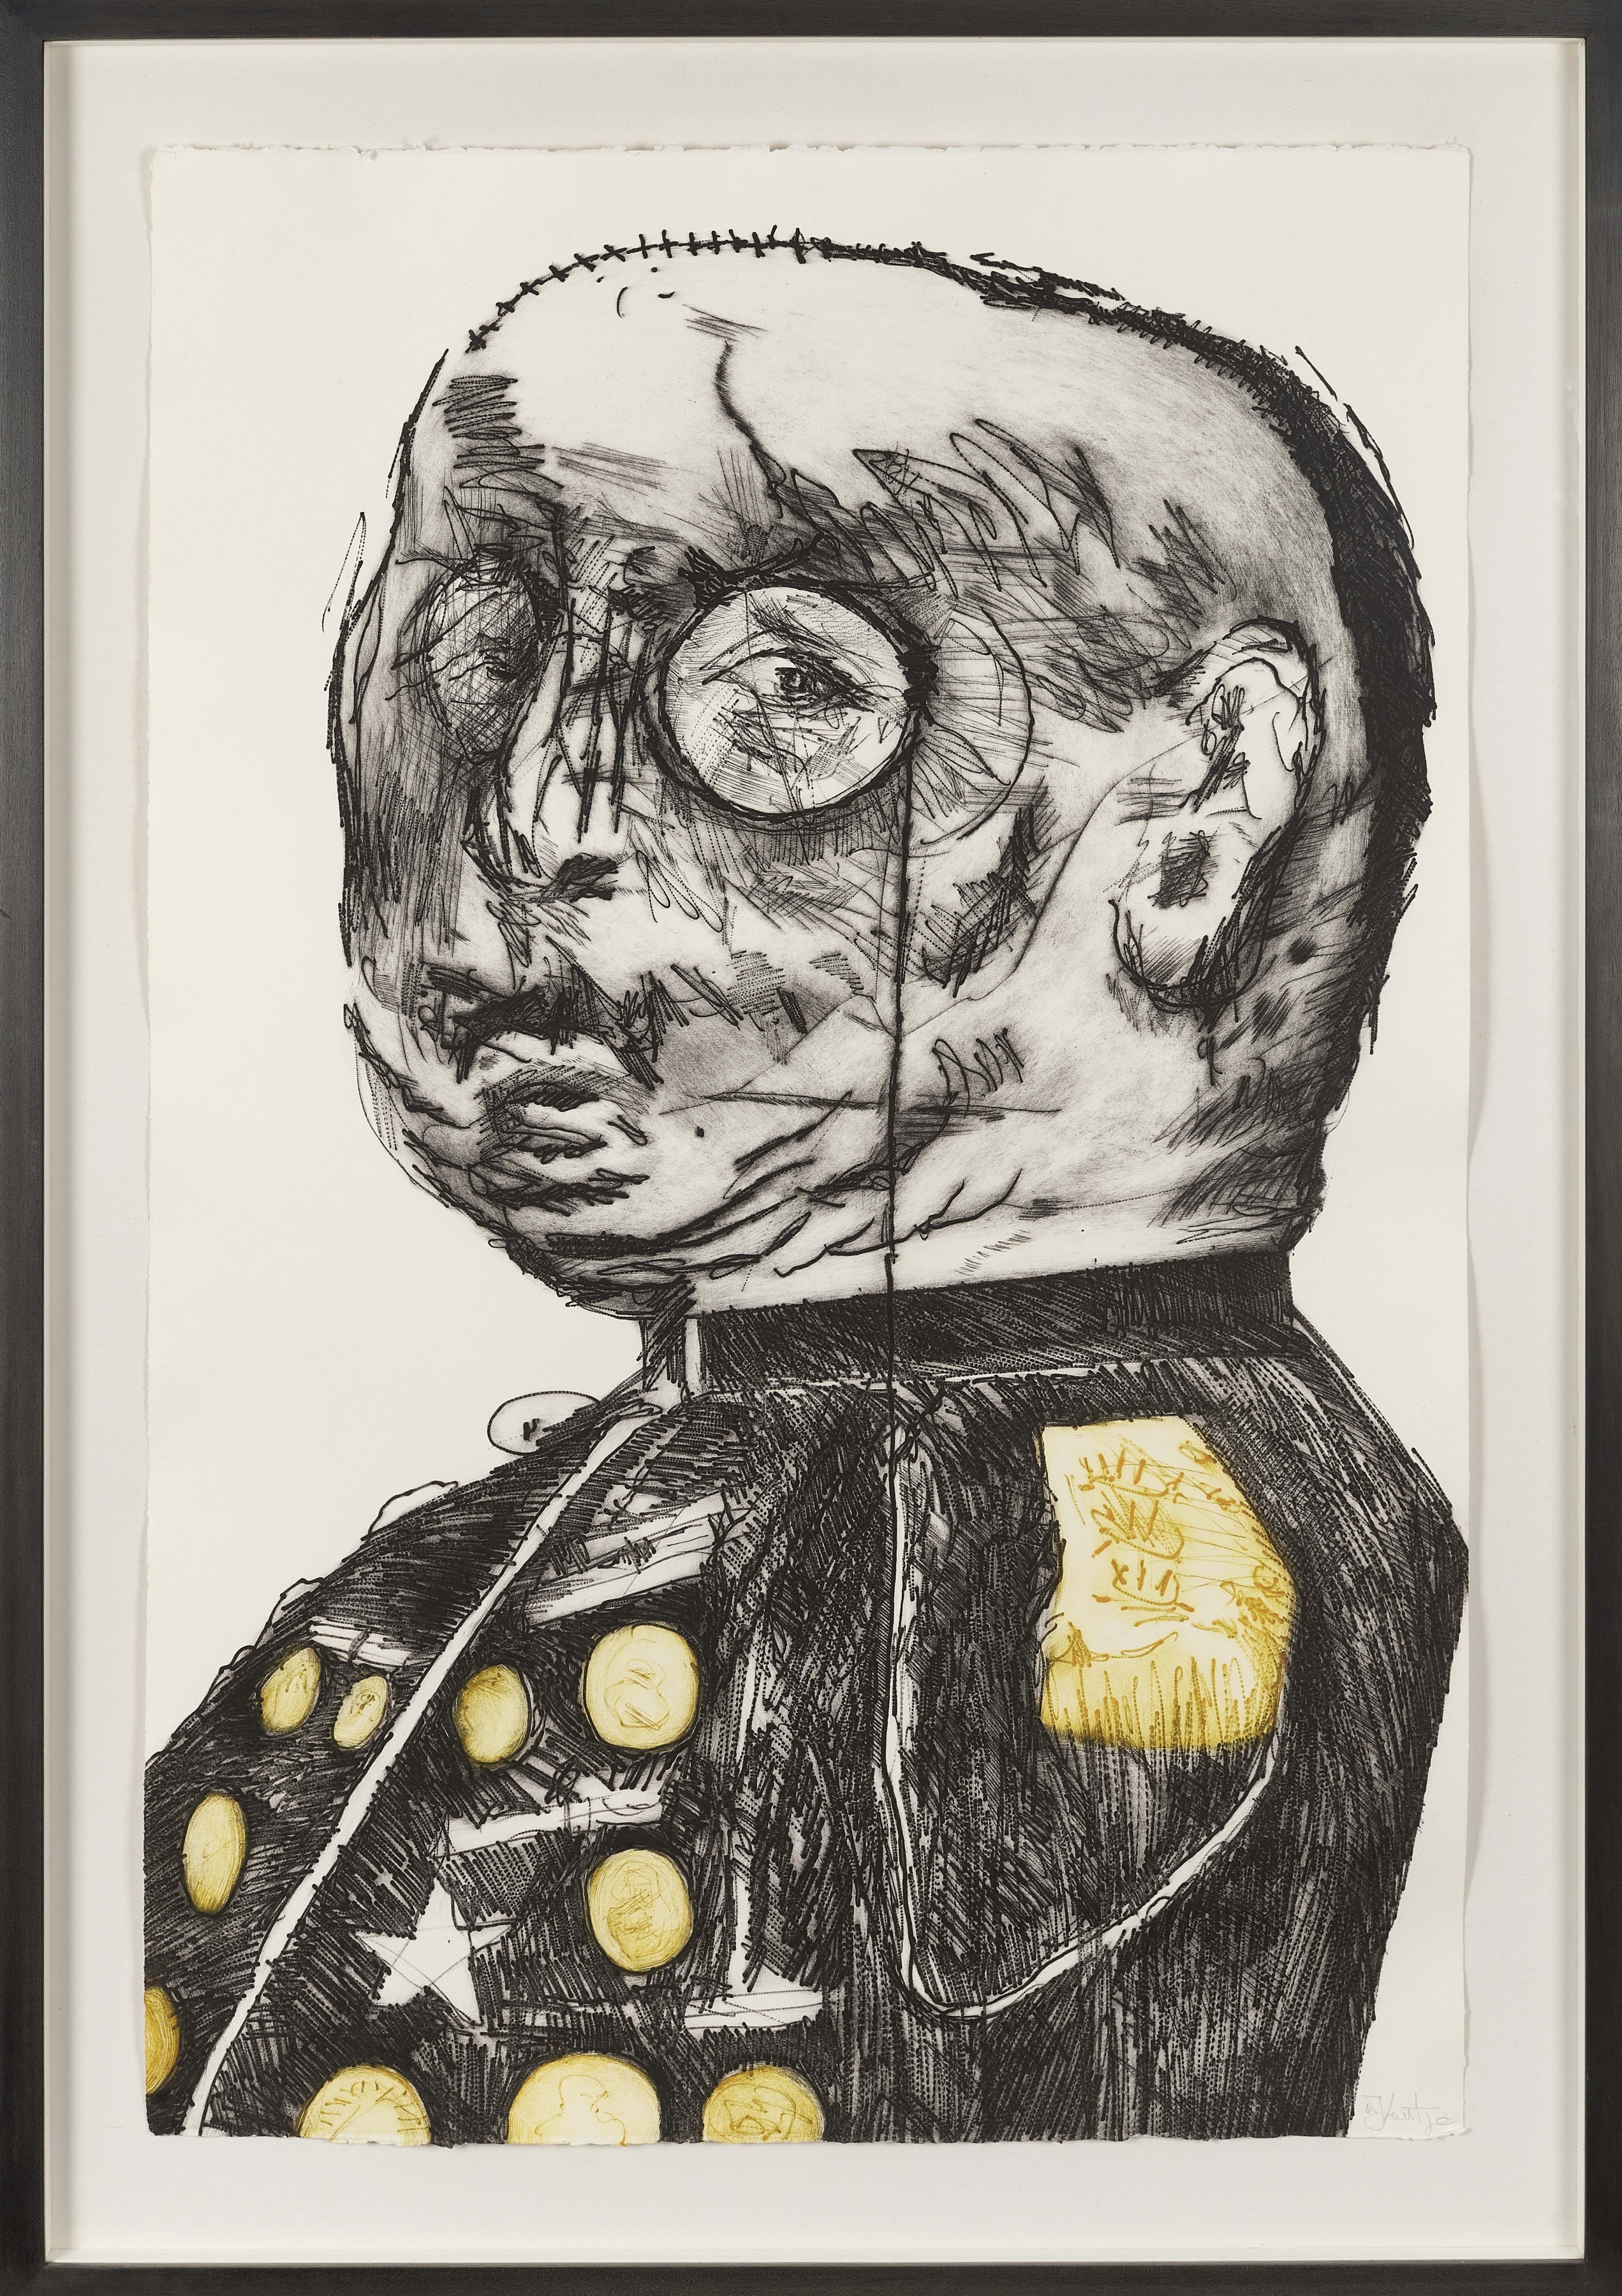 William Kentridge

General (Yellow), 1993 - 1998

Etching and hand colouring

140 x 98.5 cm (55.1 x 38.6 in)

AP from an Edition of 35

Enquire

&amp;nbsp;